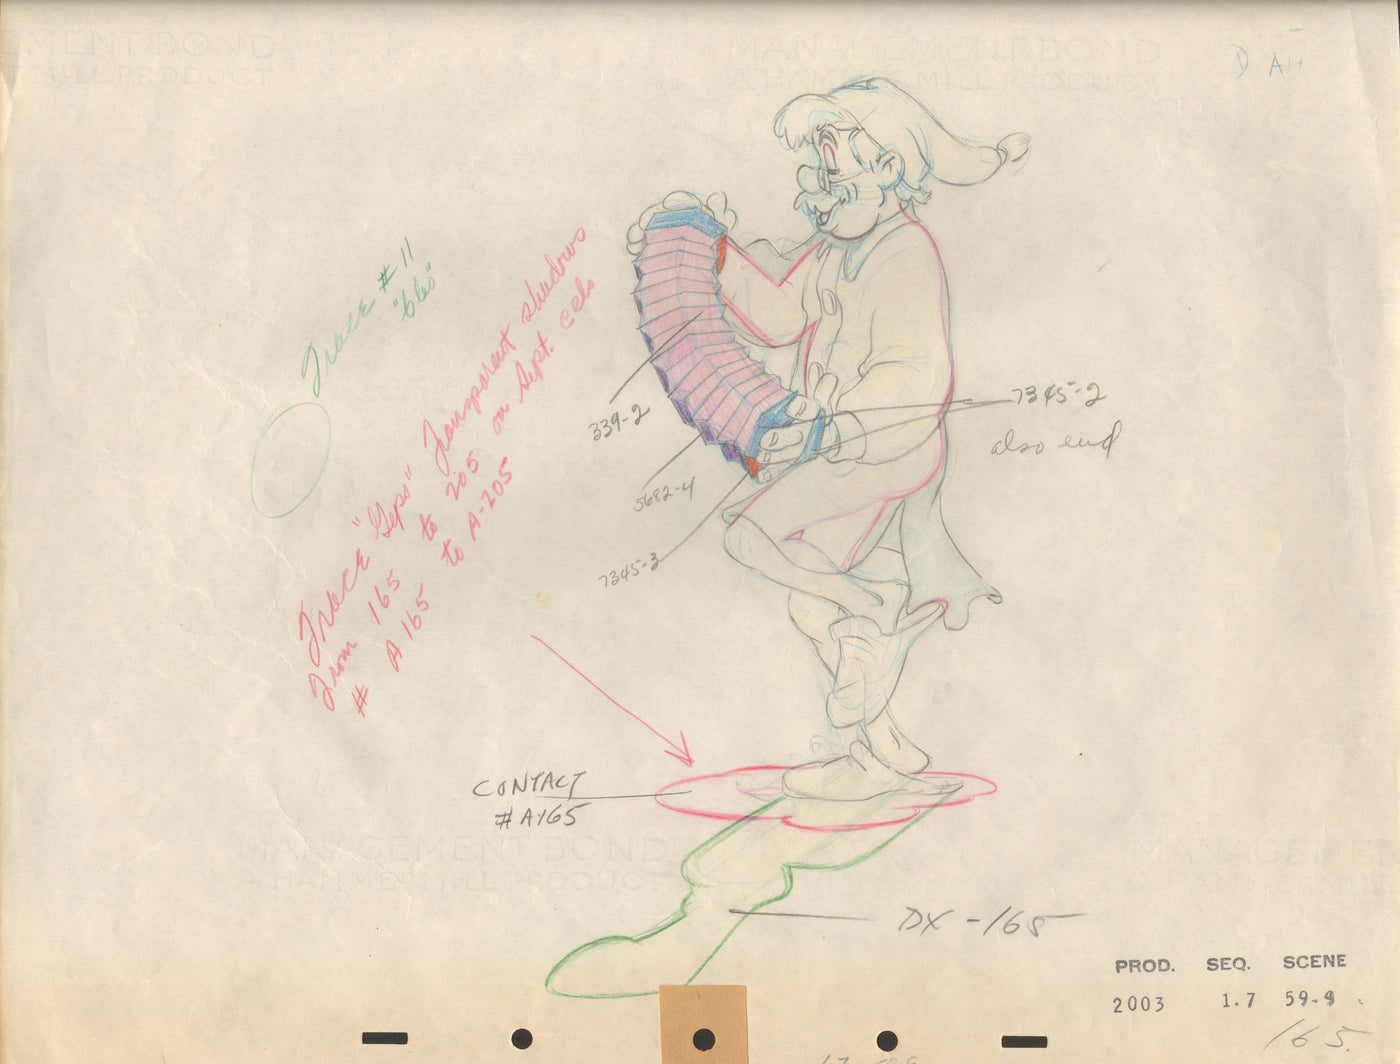 Original Walt Disney Production Drawing from Pinocchio featuring Geppetto